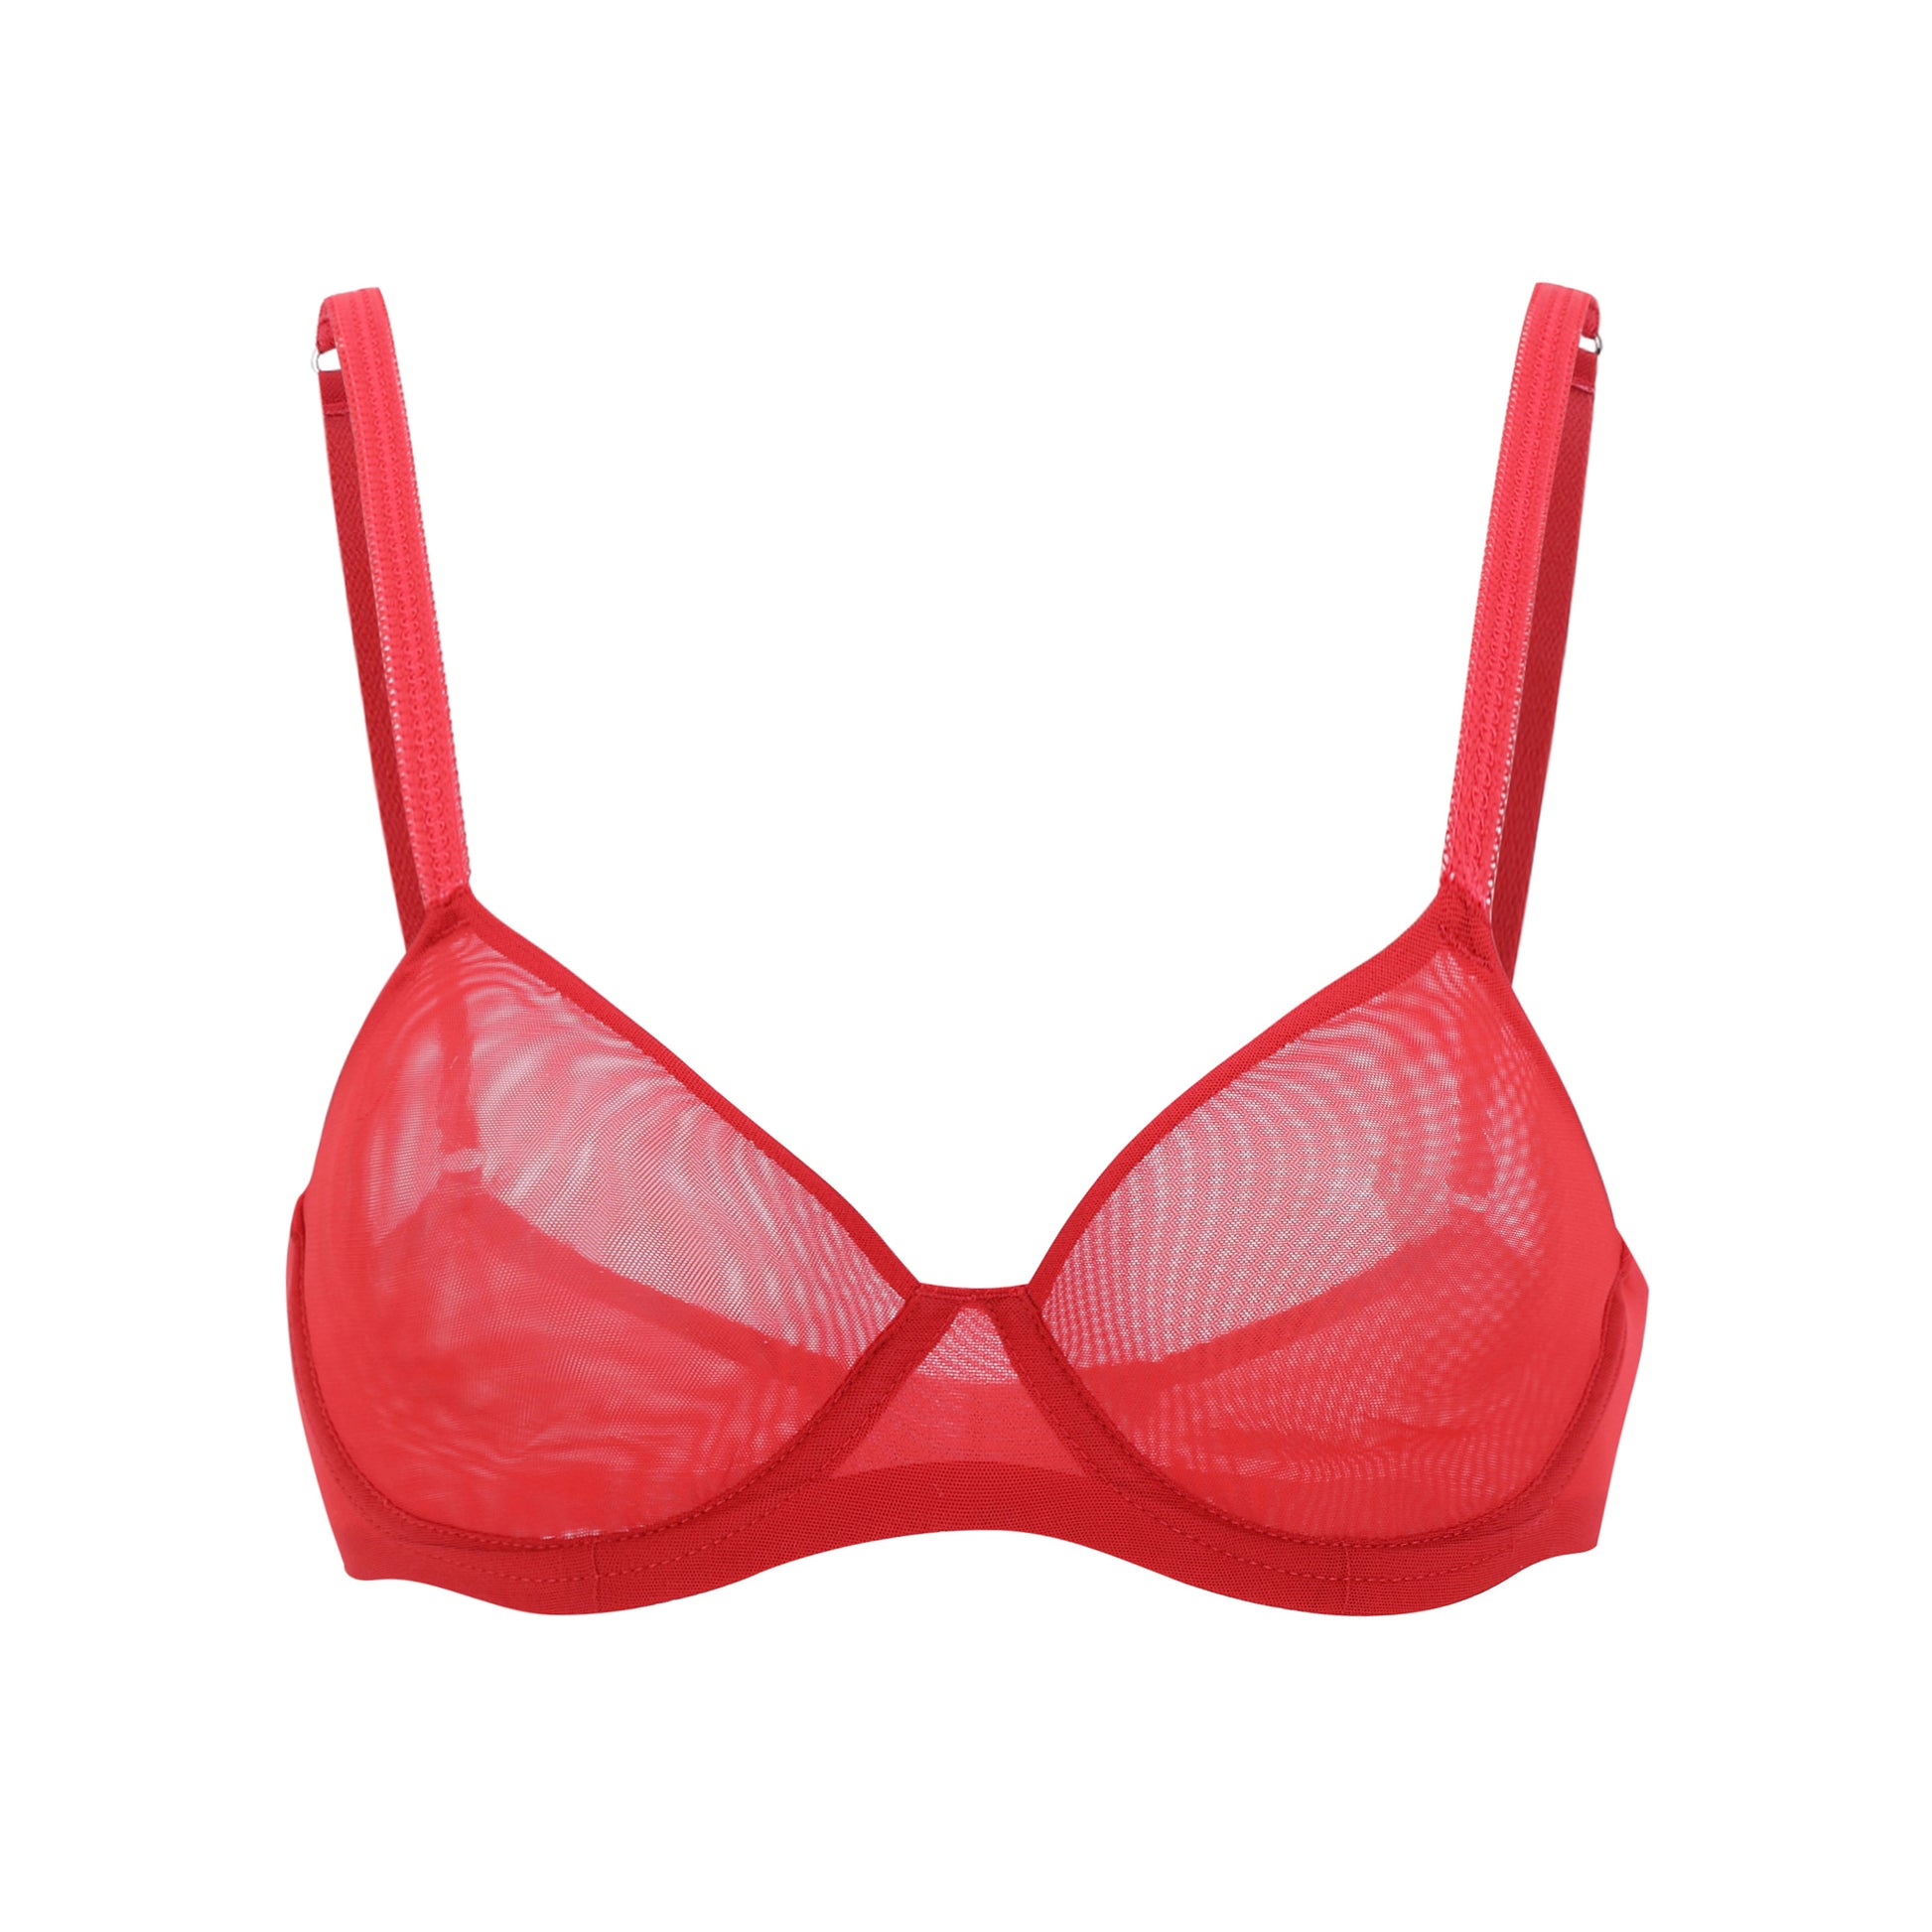 Breast and bra made with oranges or tangerines in bold red ladles